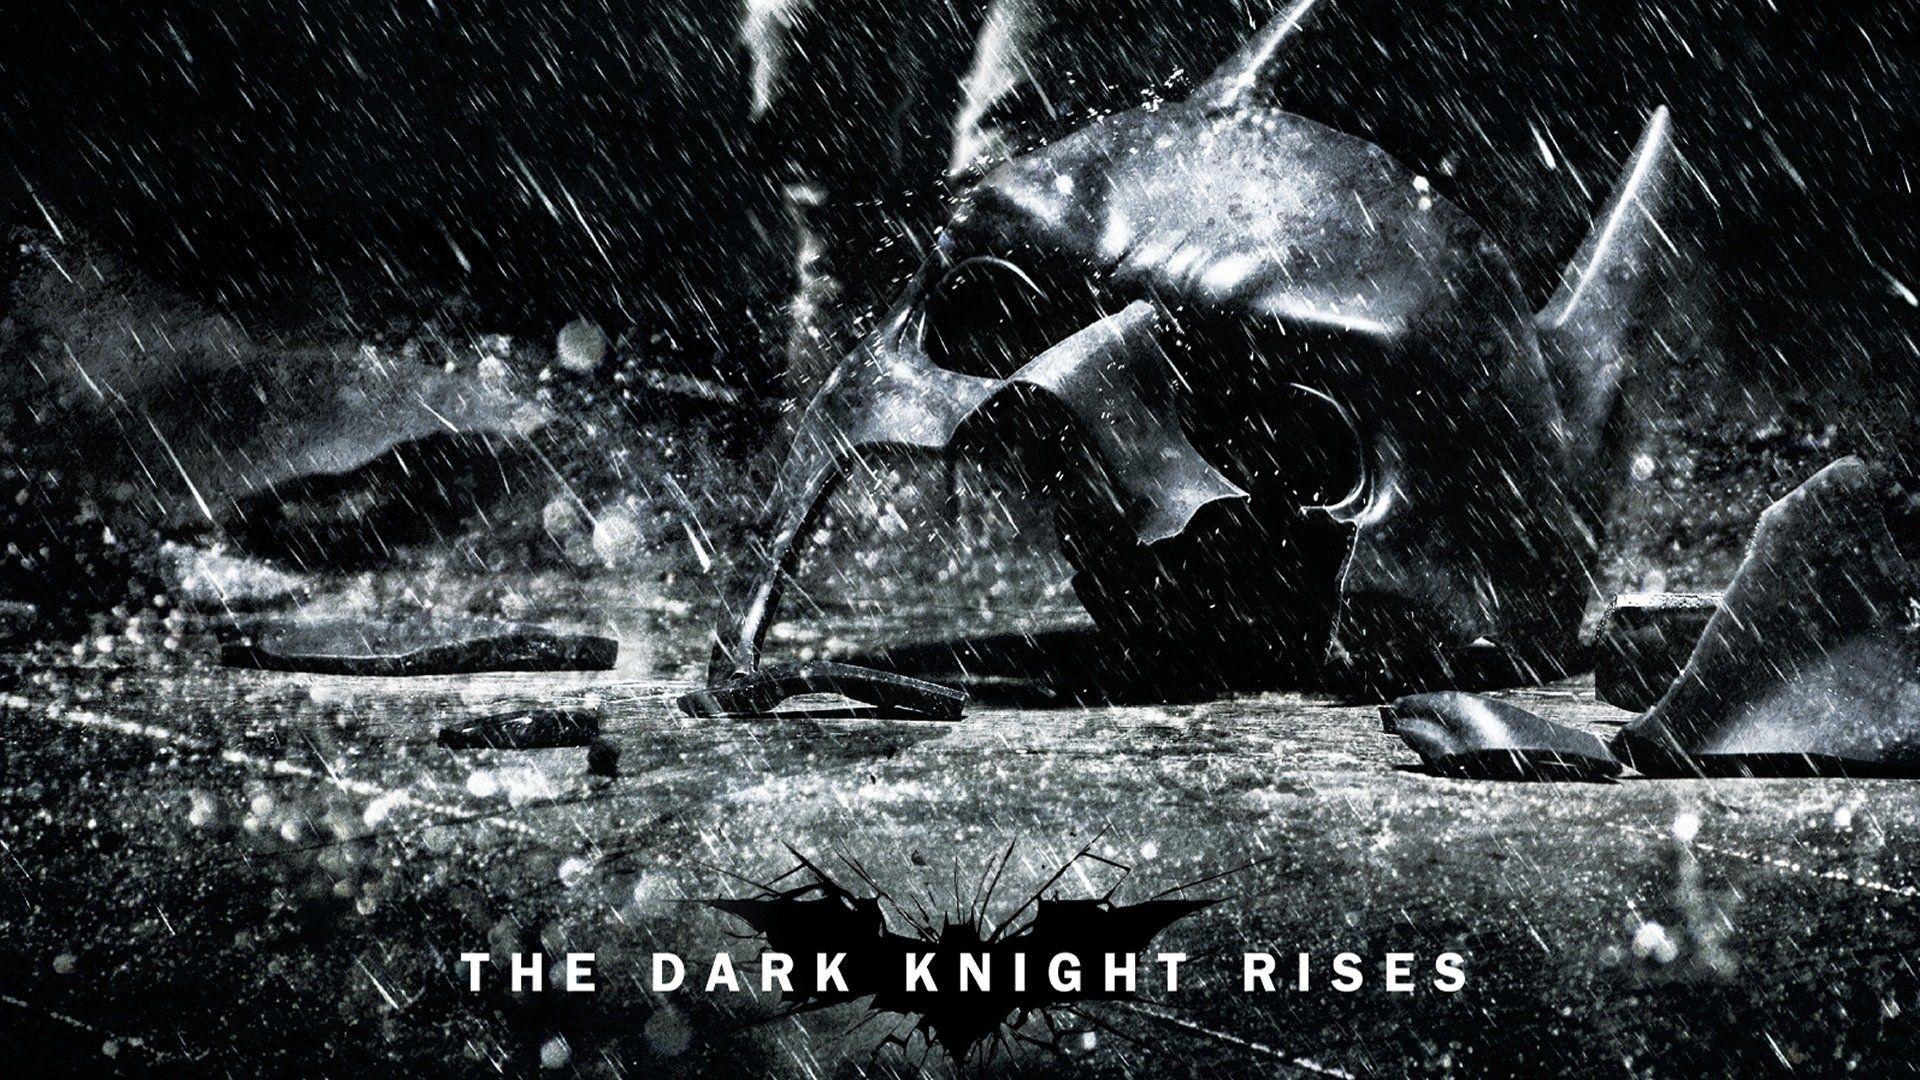 Tons of awesome the dark knight rises HD wallpapers to download for free. 